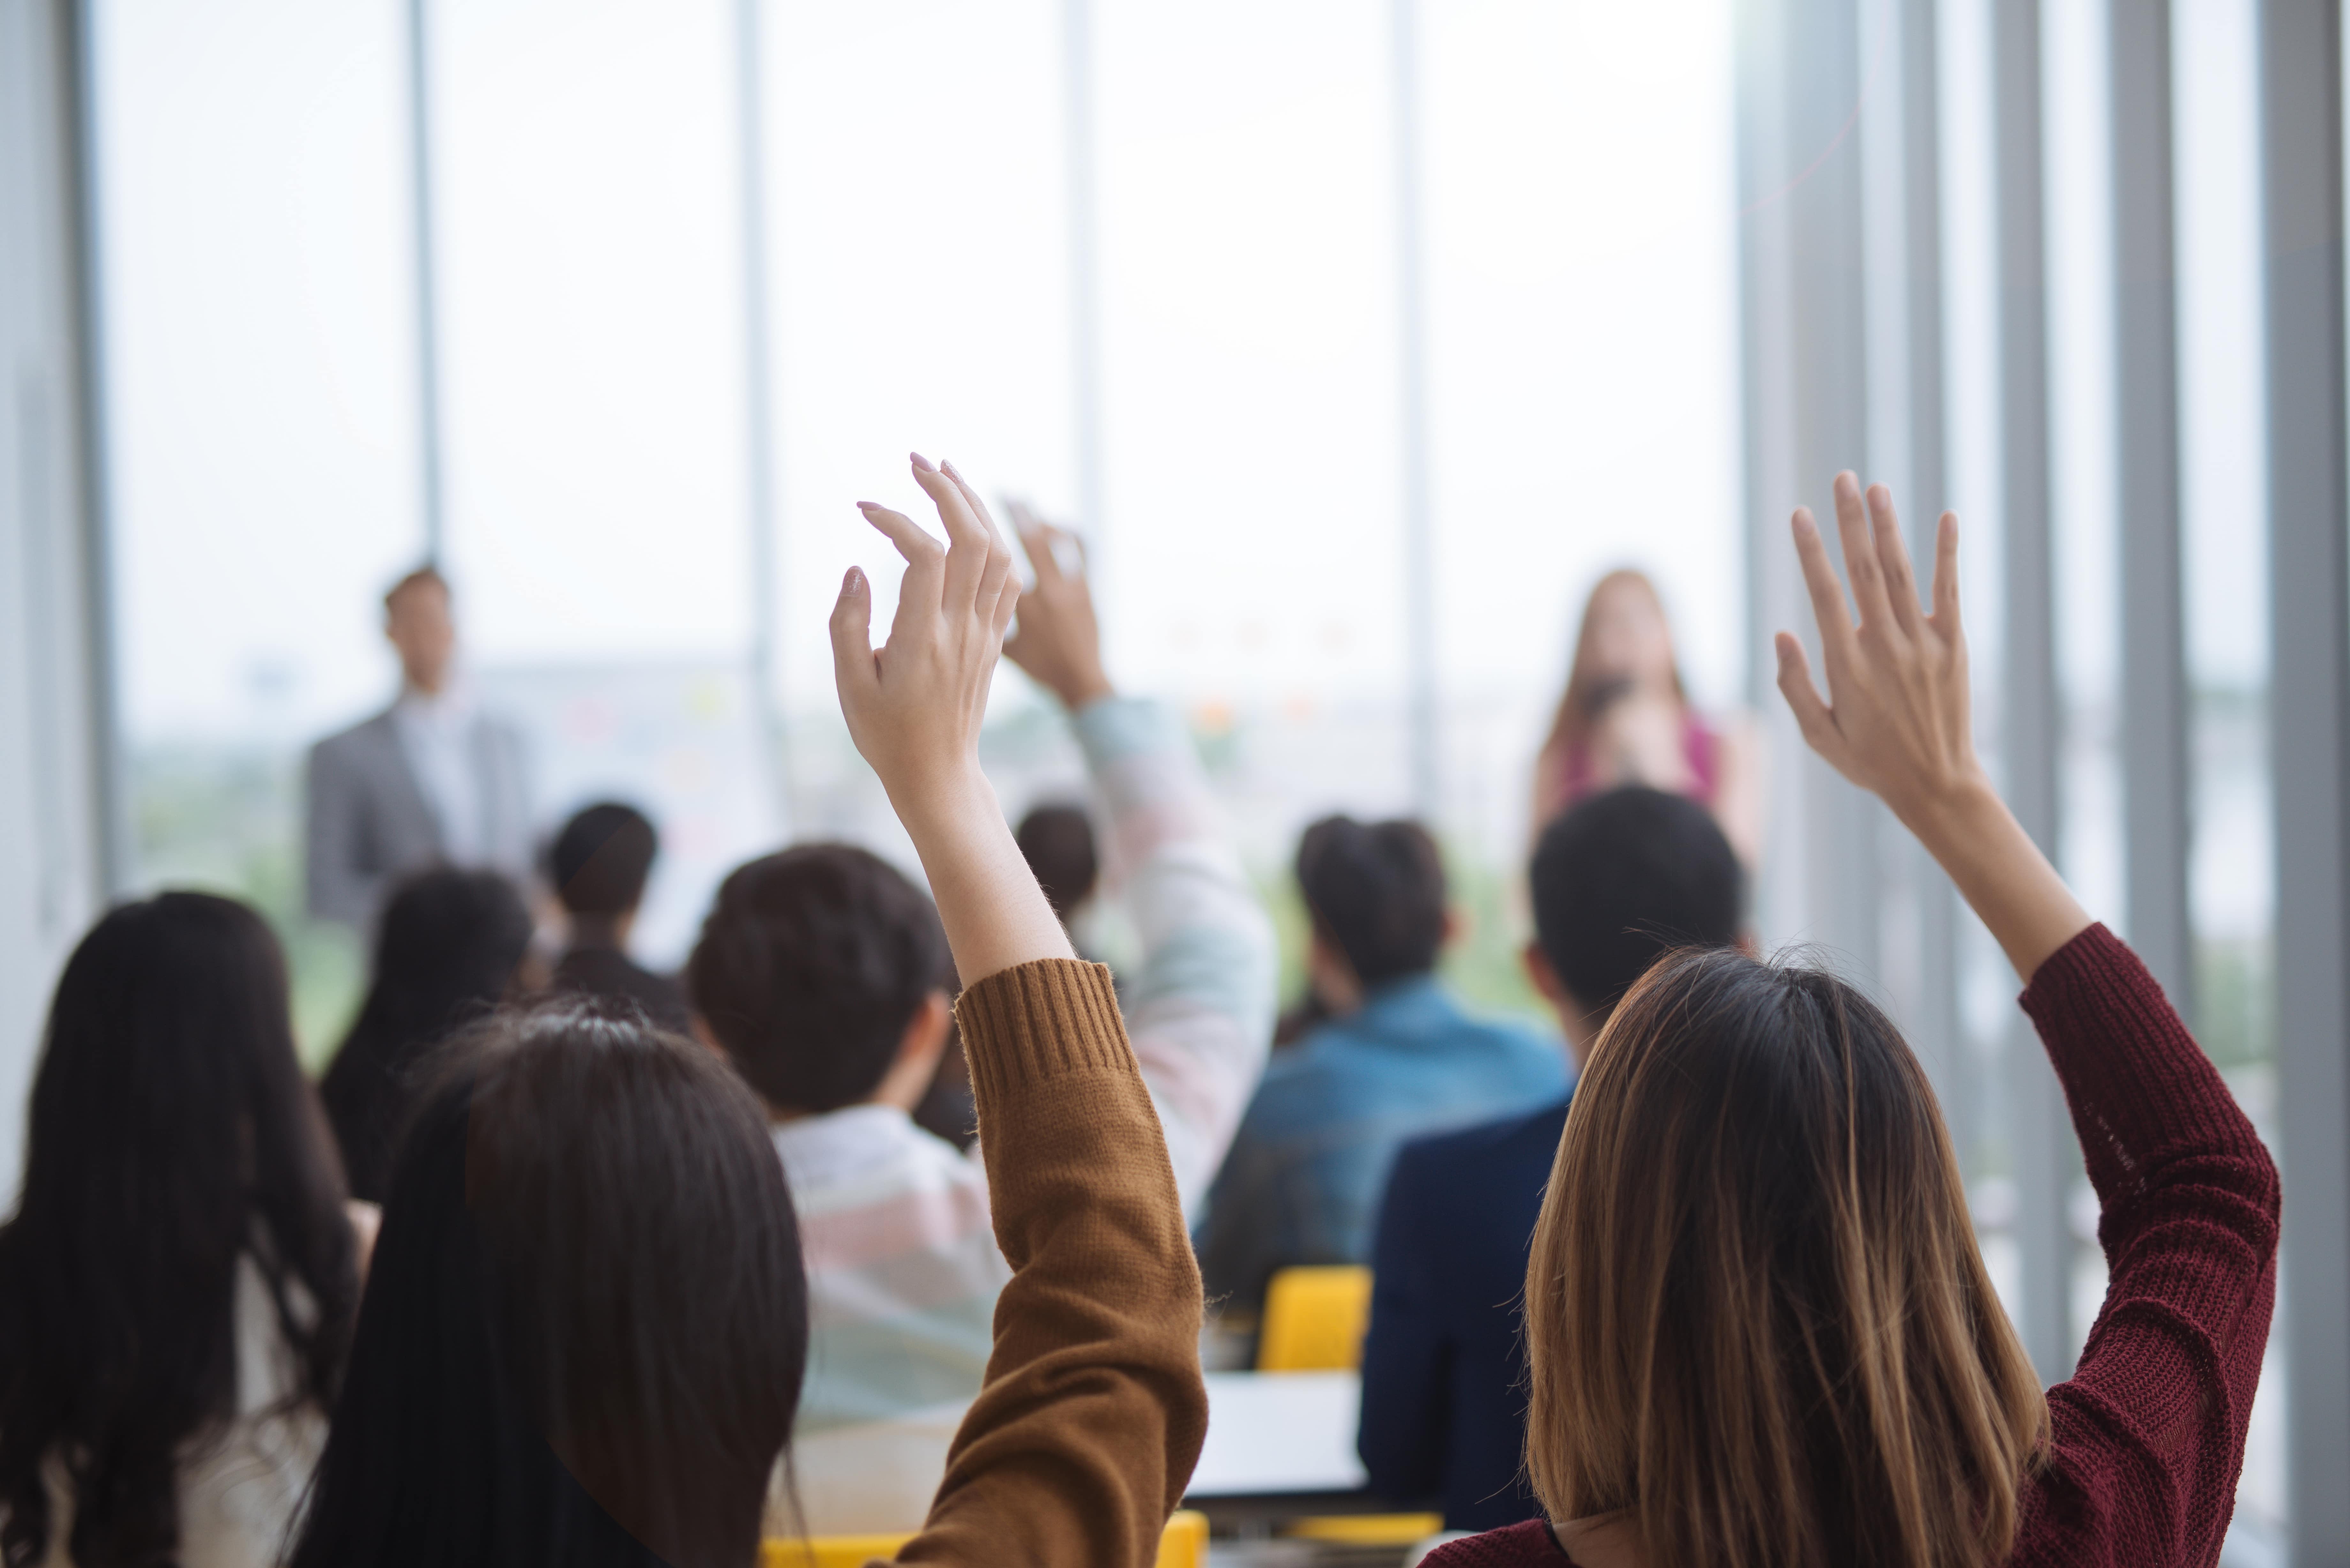 Students raising their hands in a classroom setting